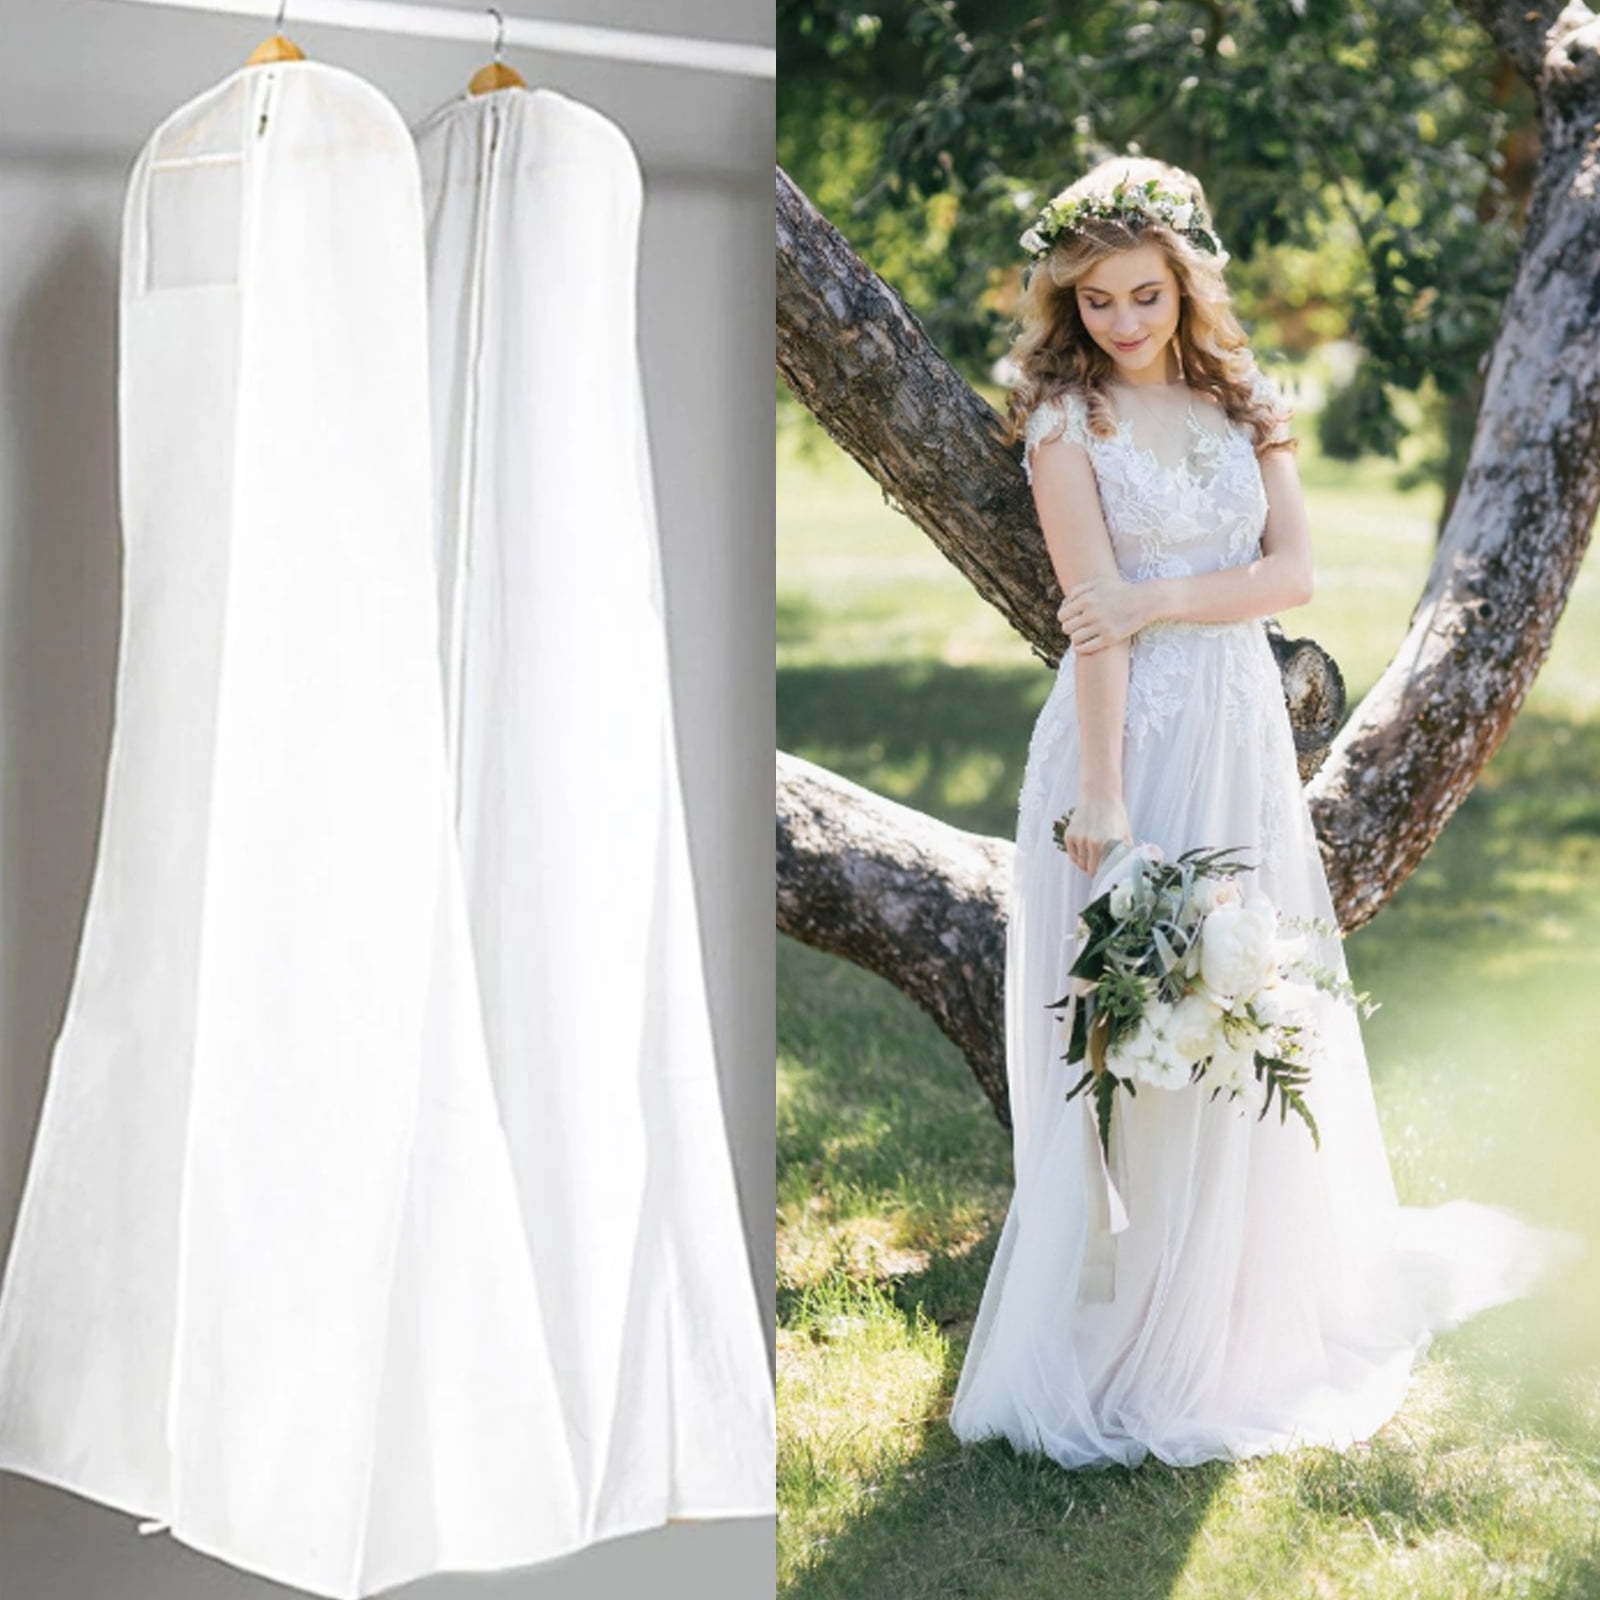 Practical Portable Zip Clothes Storage Breathable Dust-Proof Bag Folding Wedding Dress Dust Cover Bags